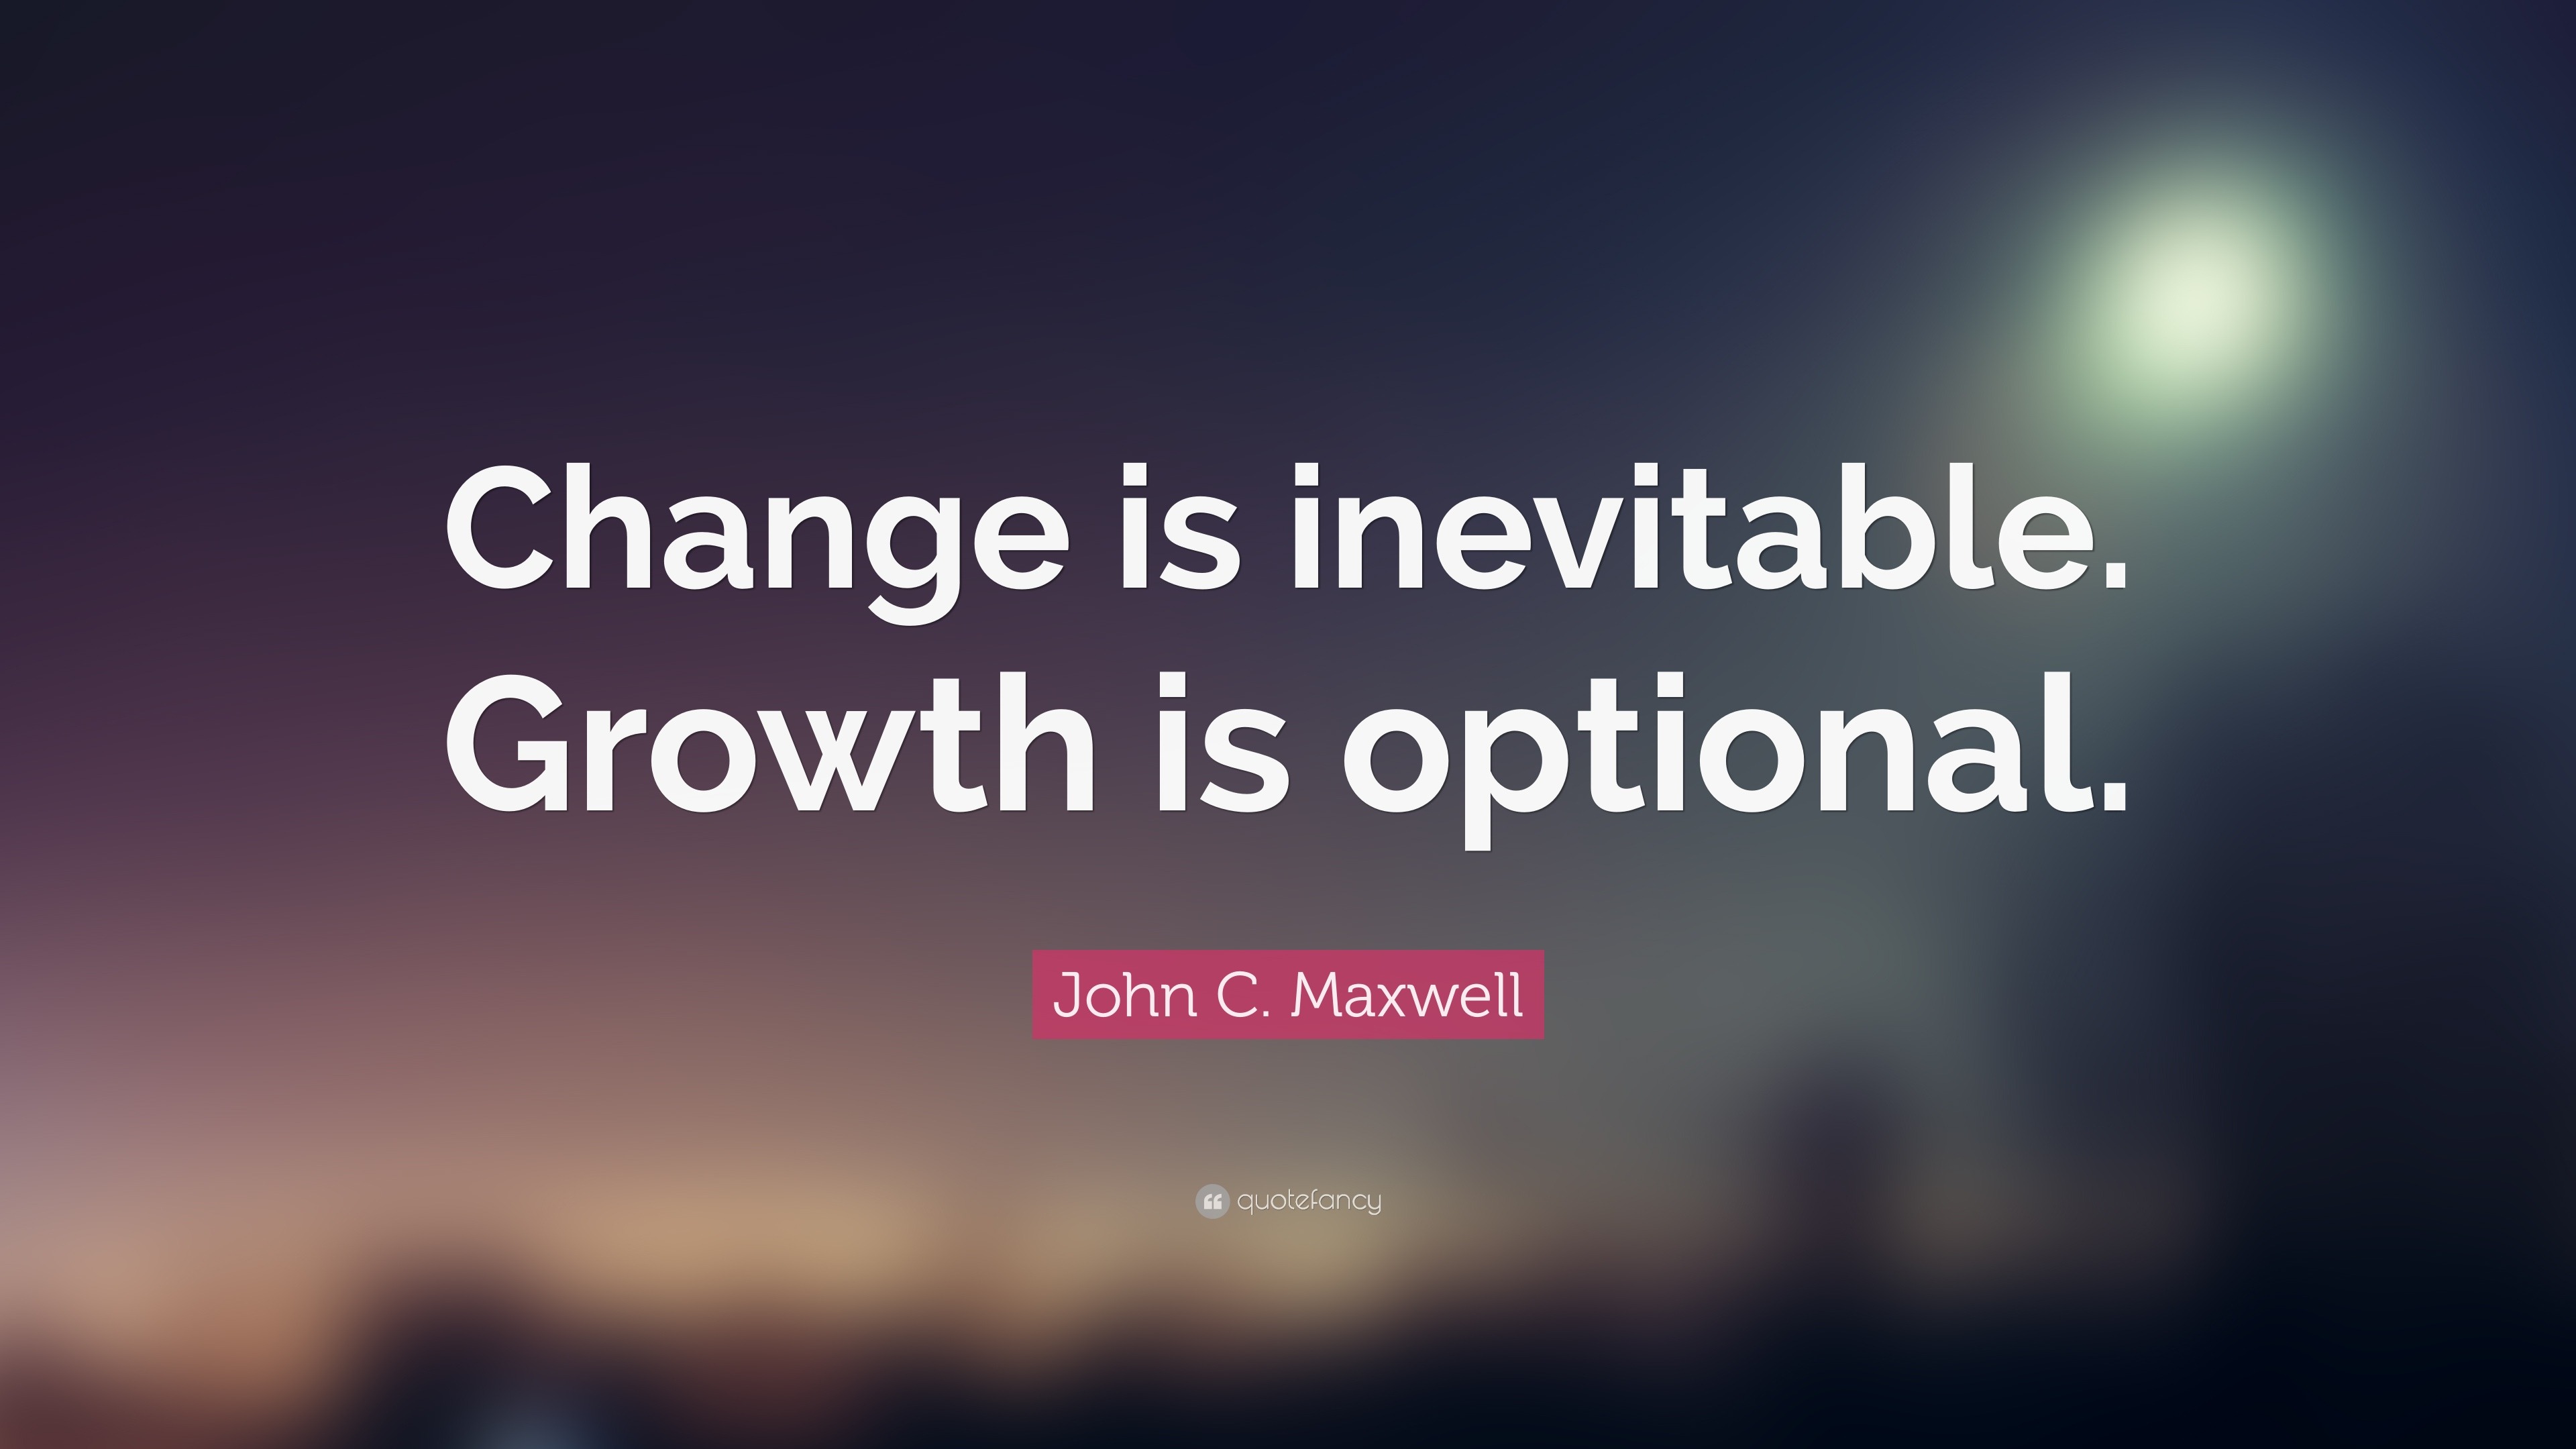 business quotes about change and growth